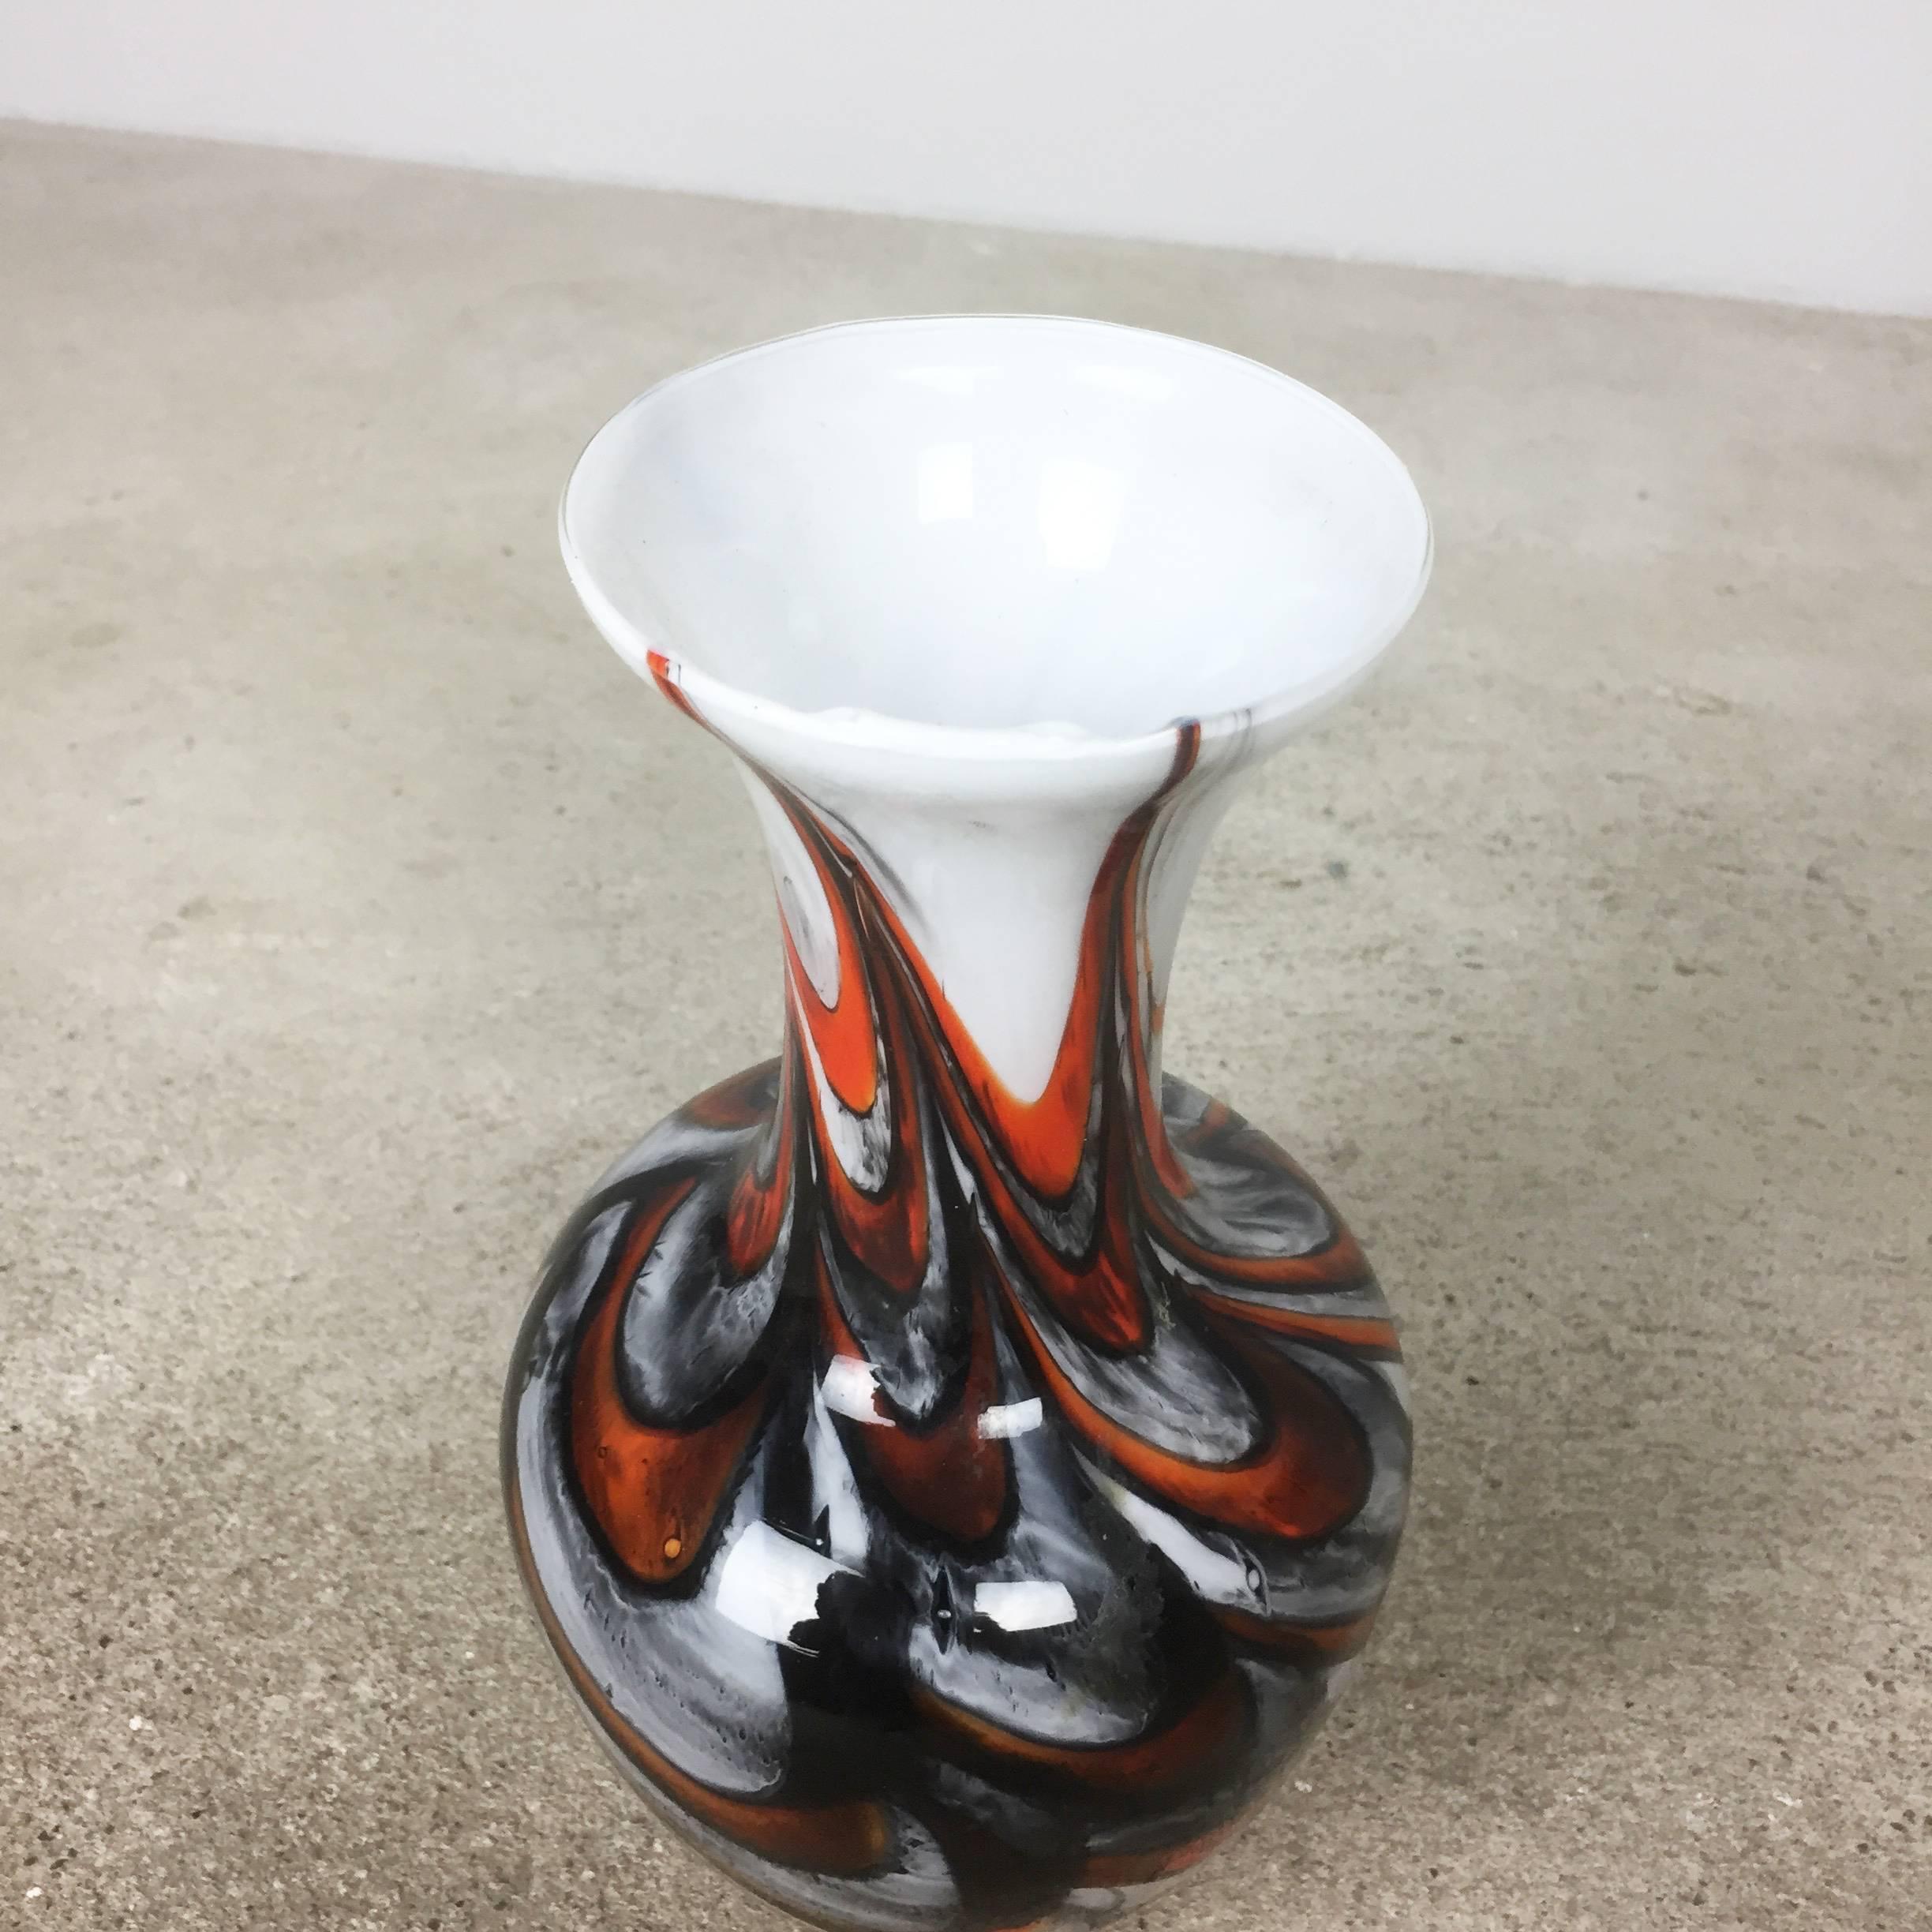 Vintage 1970s Opaline Florence Vase Designed by Carlo Moretti, Italy In Excellent Condition For Sale In Kirchlengern, DE